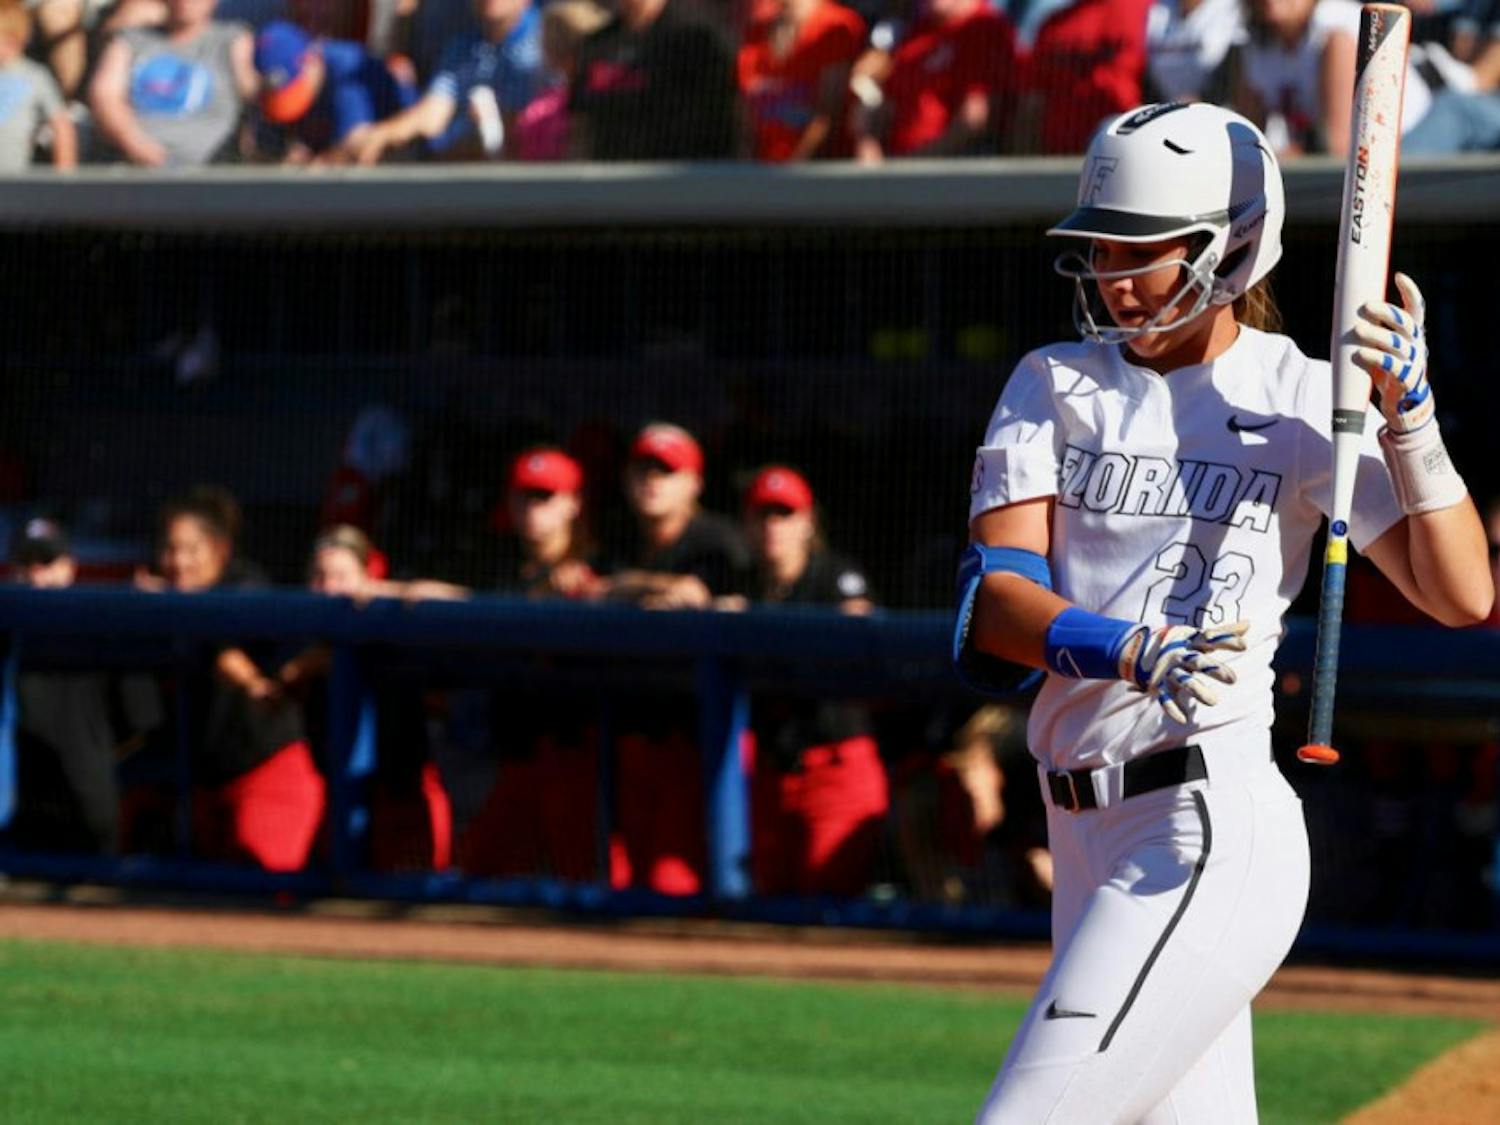 Infielder Nicole DeWitt socked a walk-off home run over the wall at Katie Seashole Pressly Stadium on Saturday, capping off a sweep for Florida against South Carolina.